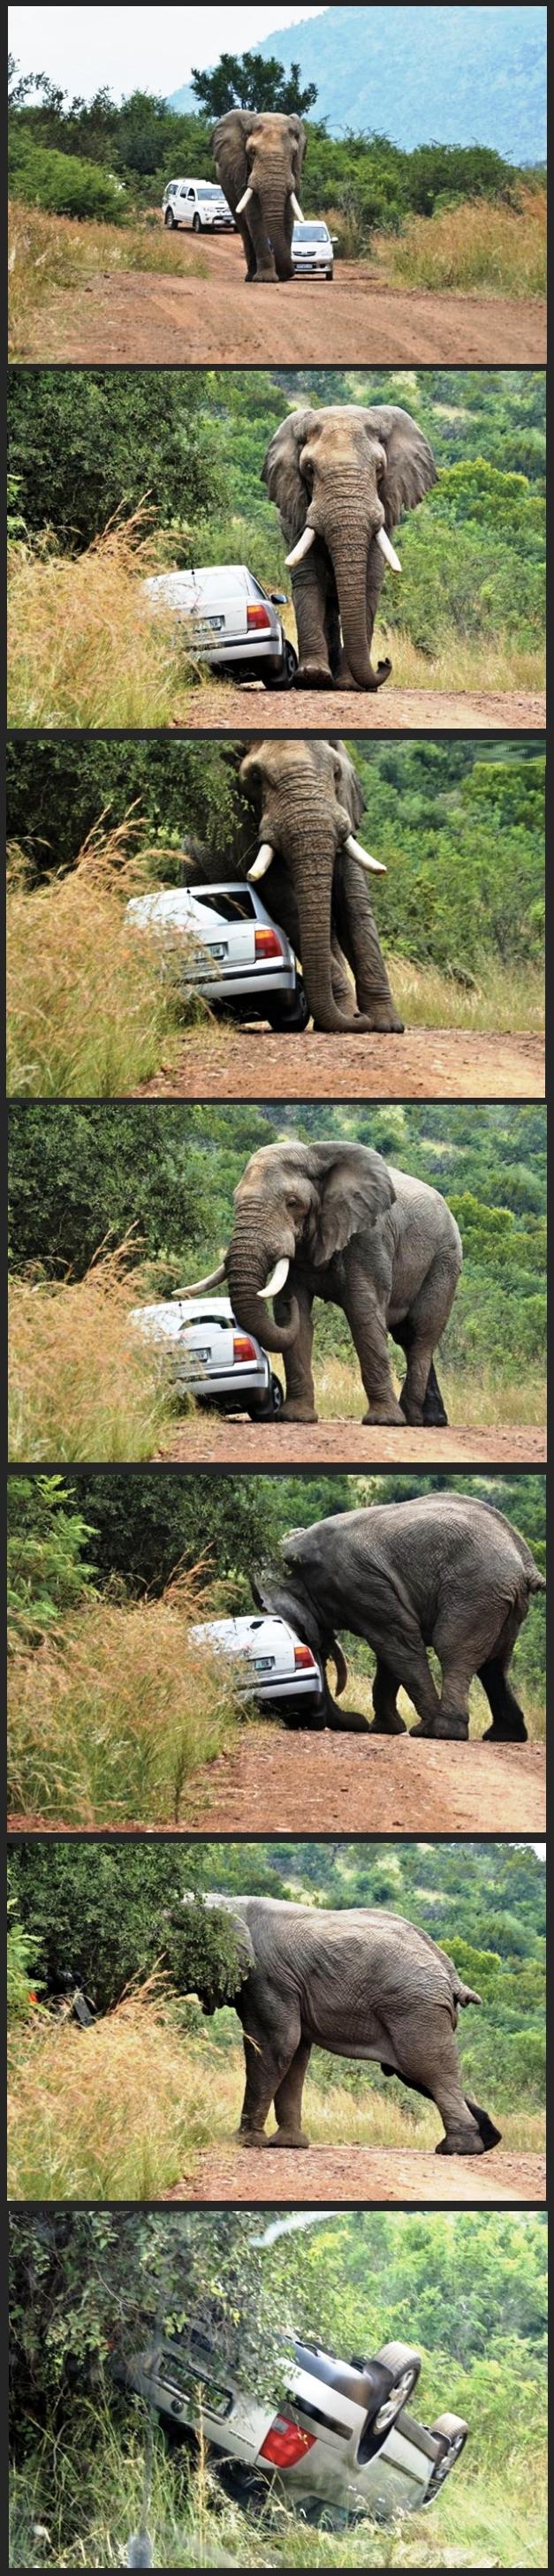 Elephant Gets Road Rage Picture Series